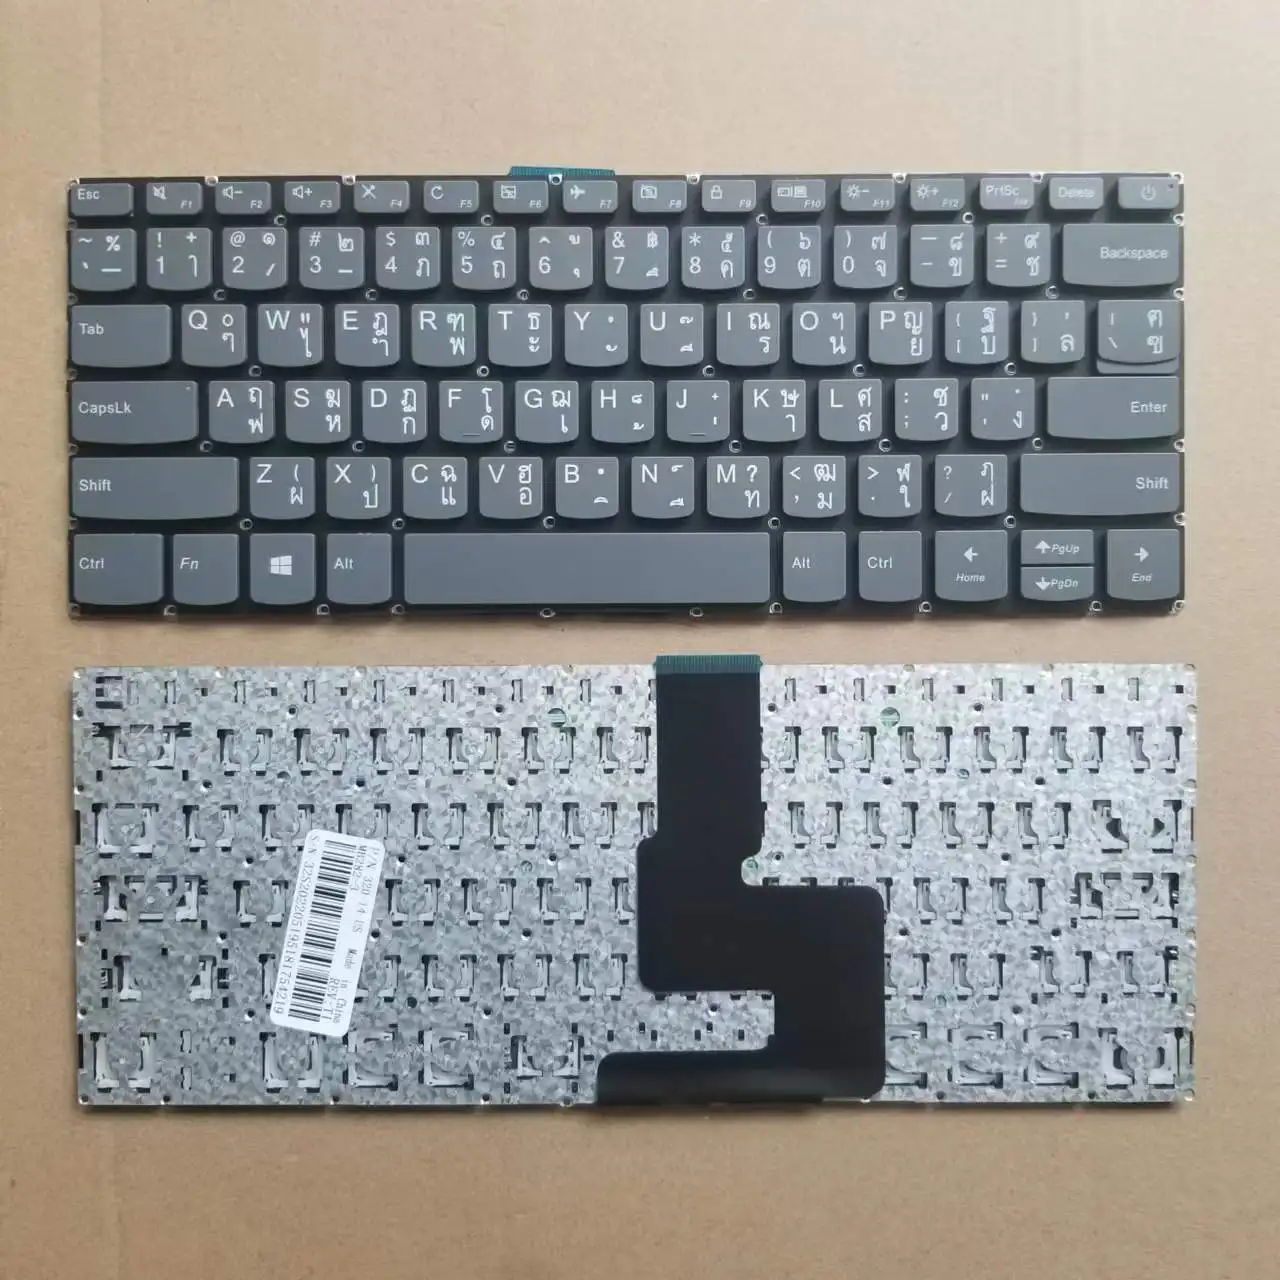 

New Thai TI Keyboard For Lenovo IdeaPad 320-14 320S-14IKBR 320-14ISK 320-14AST 320-14IAP 320S-14IKB Without Frame Grey